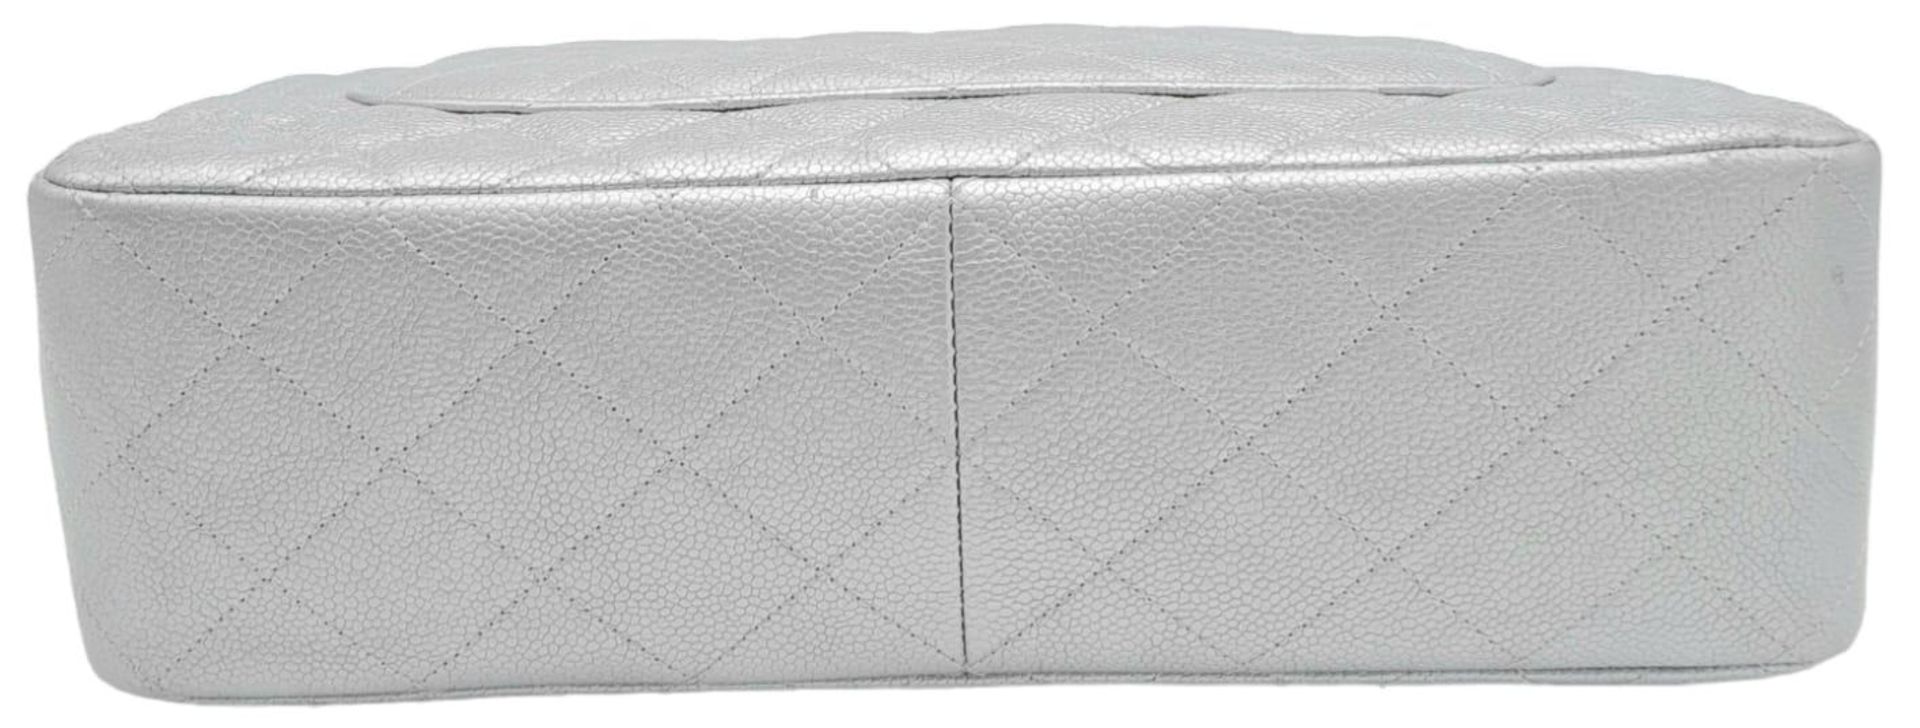 A Chanel Metallic Silver Double Flap Jumbo Bag. Quilted caviar leather. Silver tone hardware. Double - Image 4 of 12